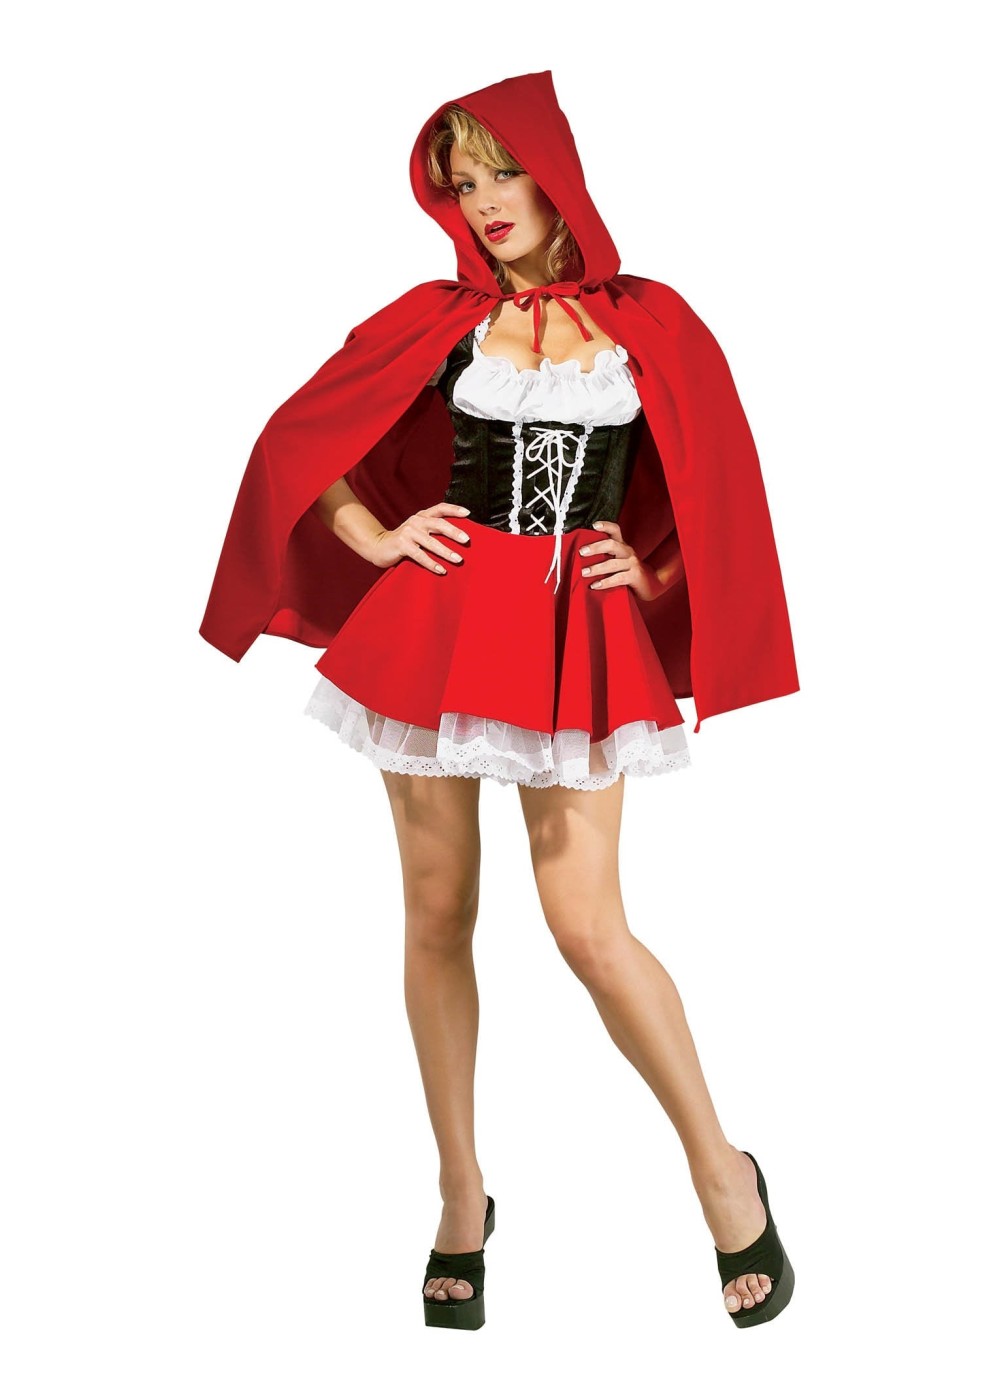 Sultry Womens Red Riding Hood Costume